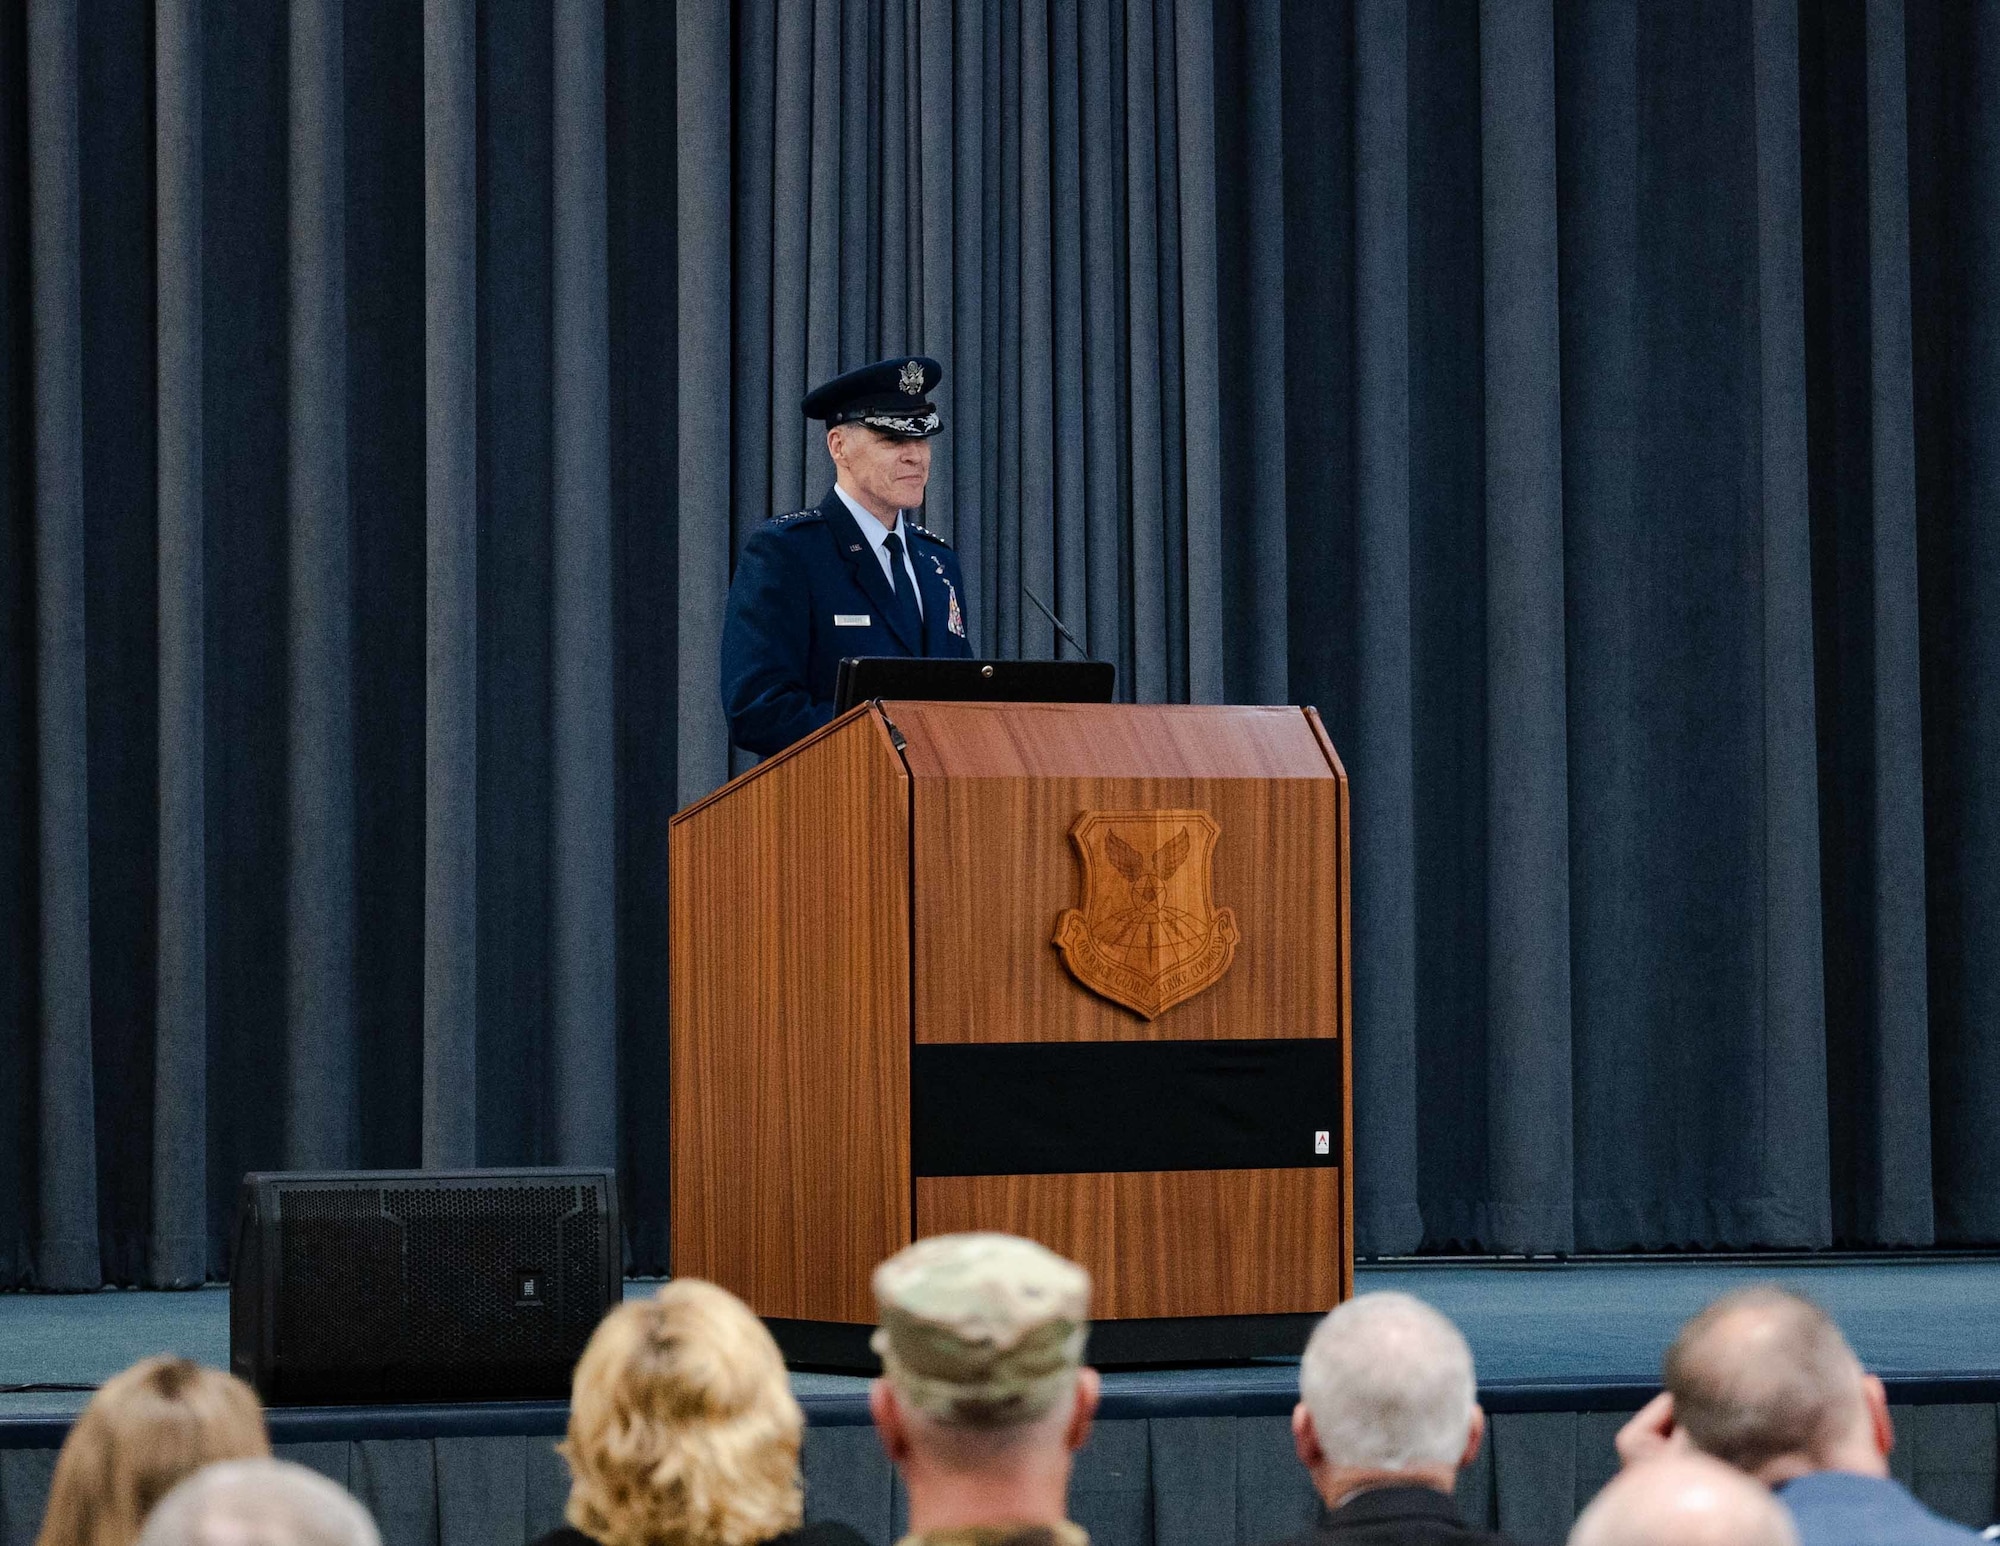 Gen. Thomas Bussiere, Air Force Global Strike Command commander, gives remarks during his assumption of command ceremony at Barksdale Air Force Base, La., Dec. 7, 2022.